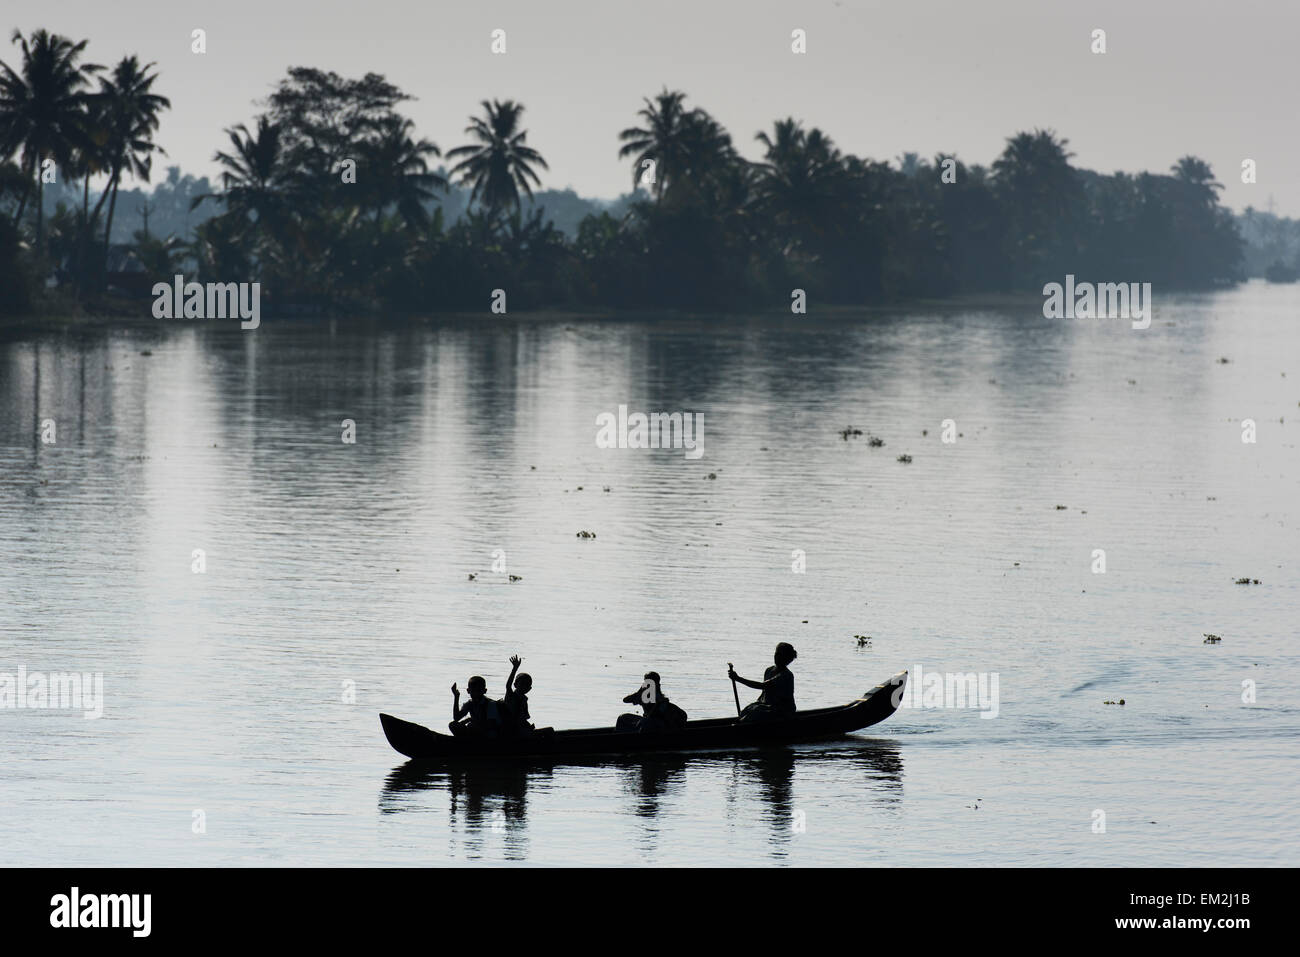 Woman taking children to school in a small boat, Backwaters canal system, Kerala, South India, India Stock Photo